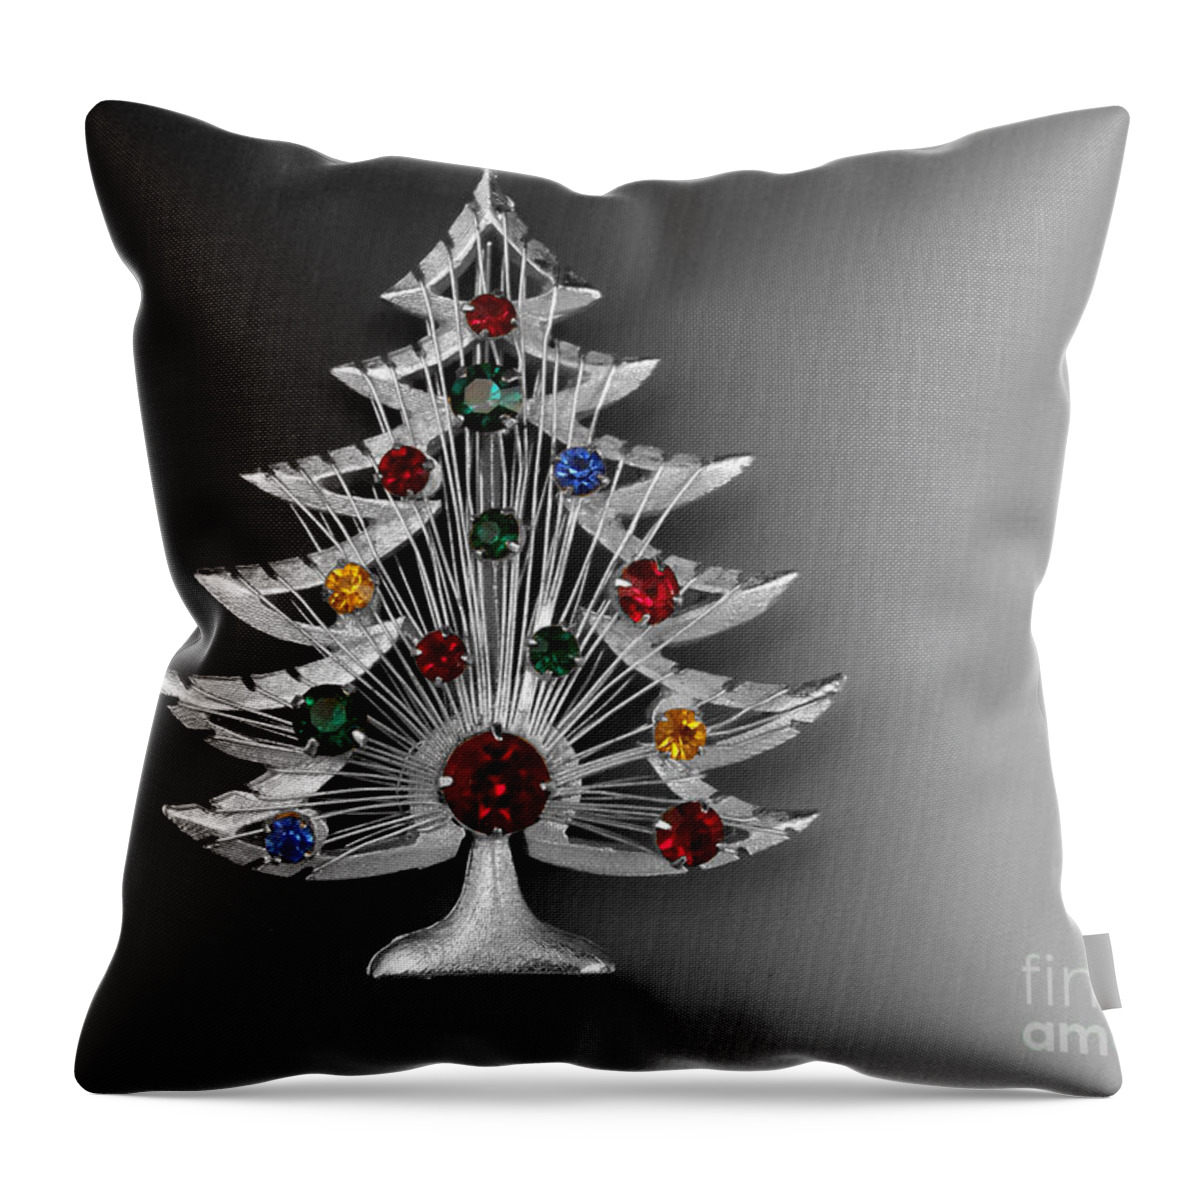 Vintage Throw Pillow featuring the photograph Vintage Christmas Tree by Jai Johnson